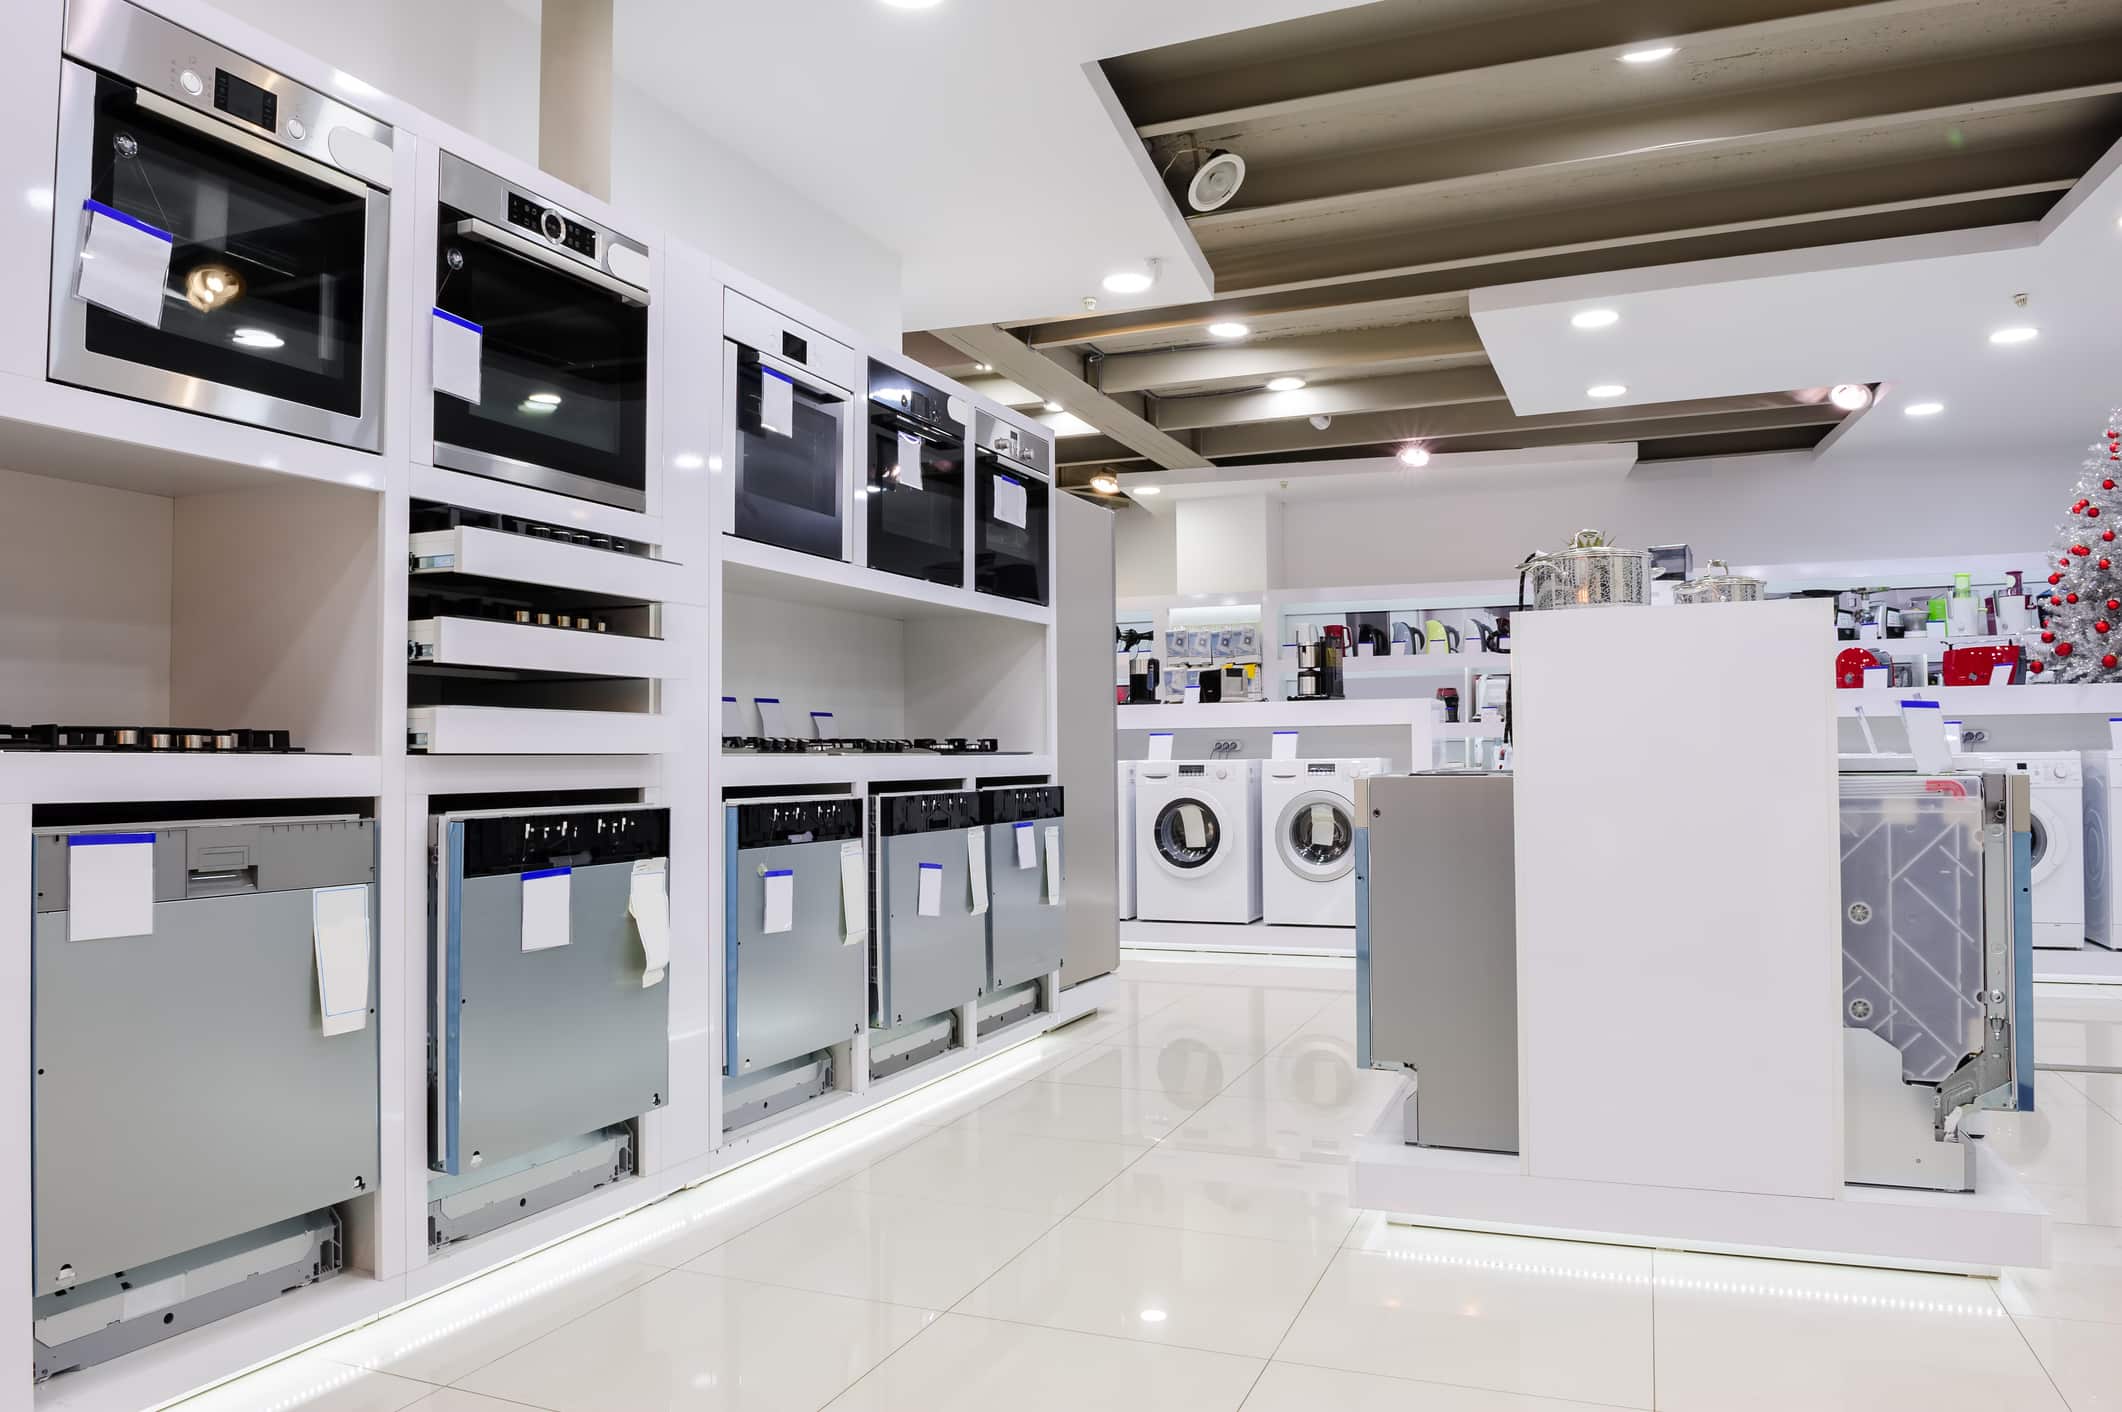 extended warranty. Gas and electric ovens and other home related appliance or equipment in the retail store showroom